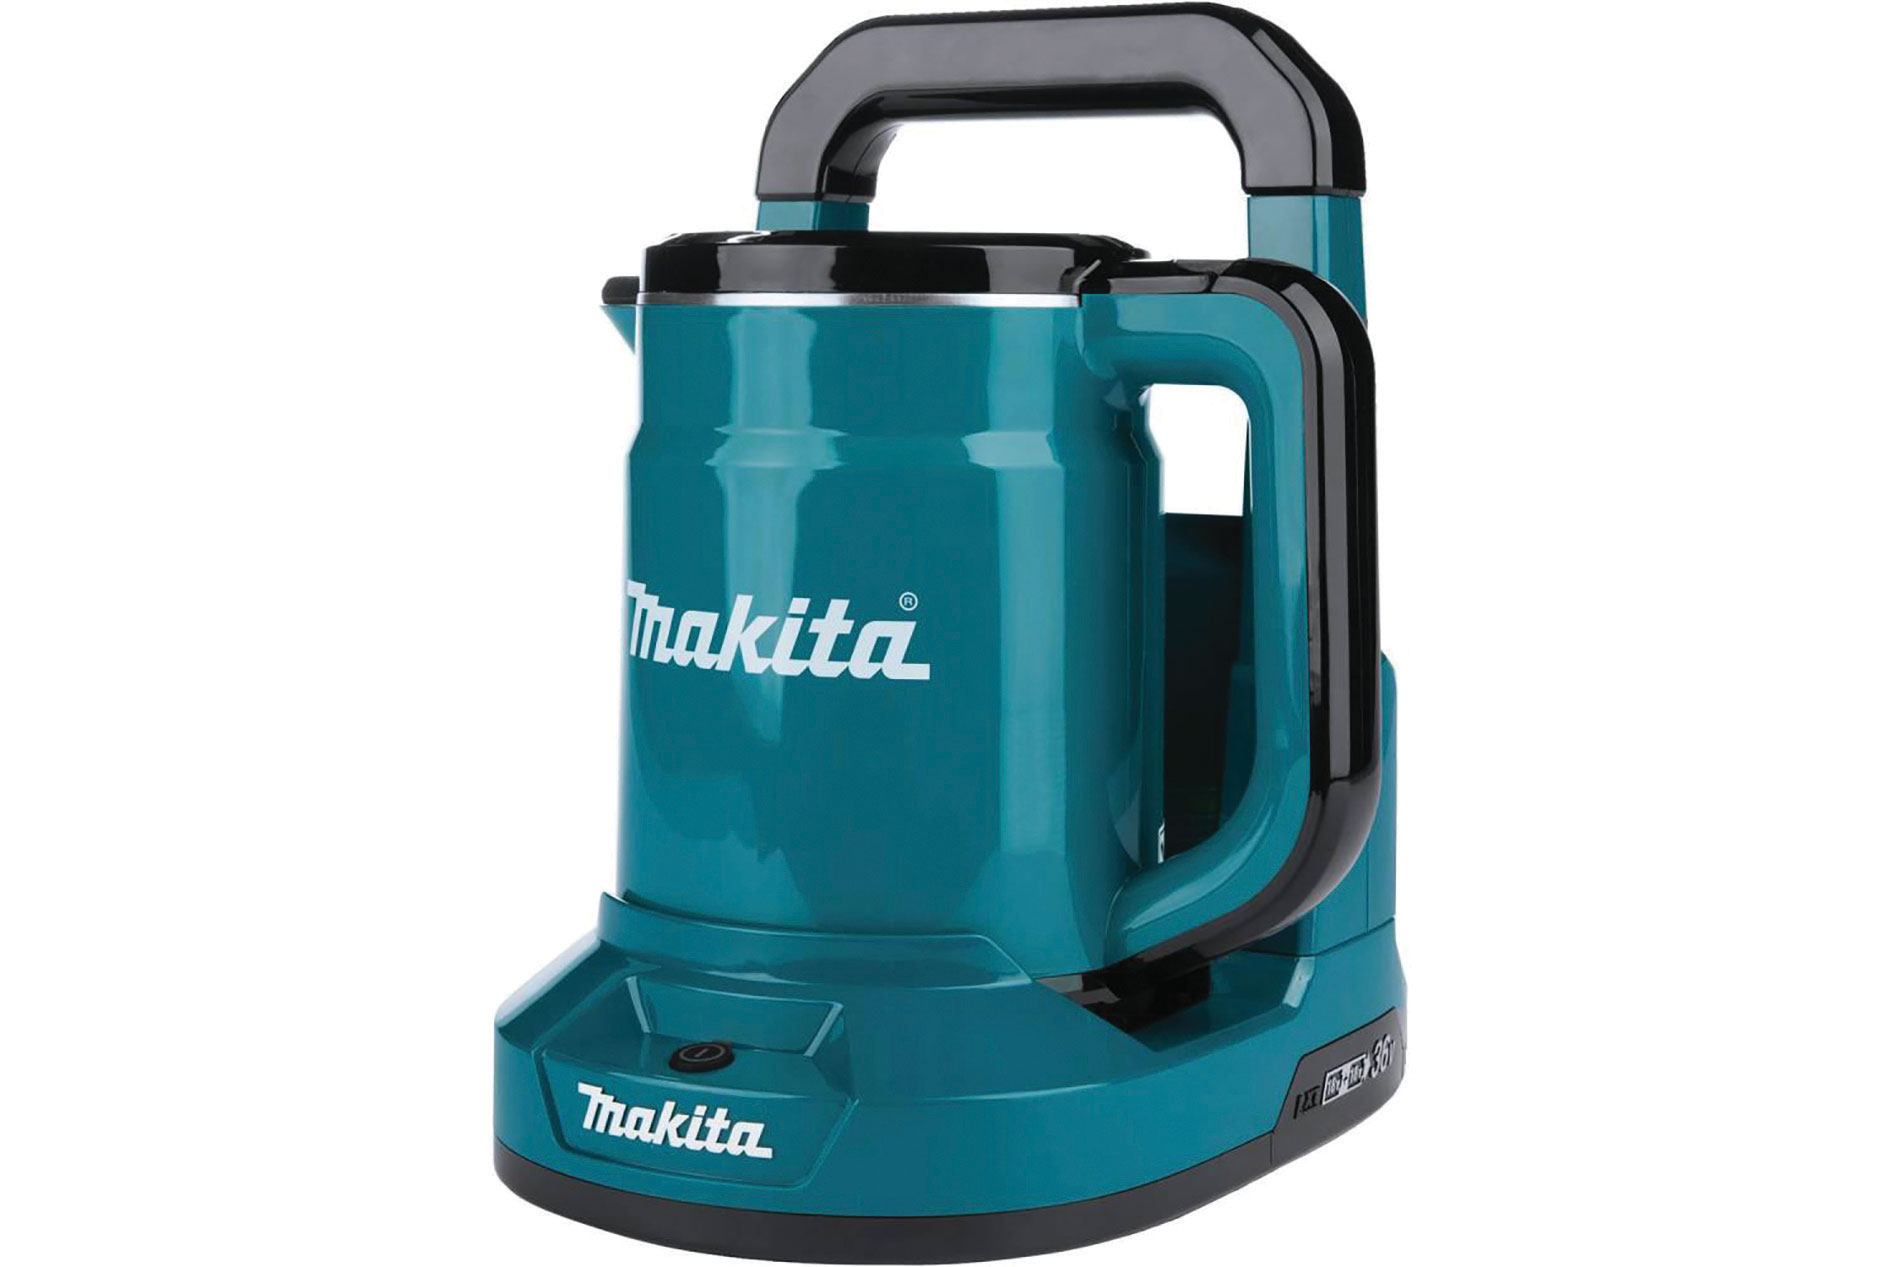 Black and blue kettle with the "Makita" logo. Image by Makita.